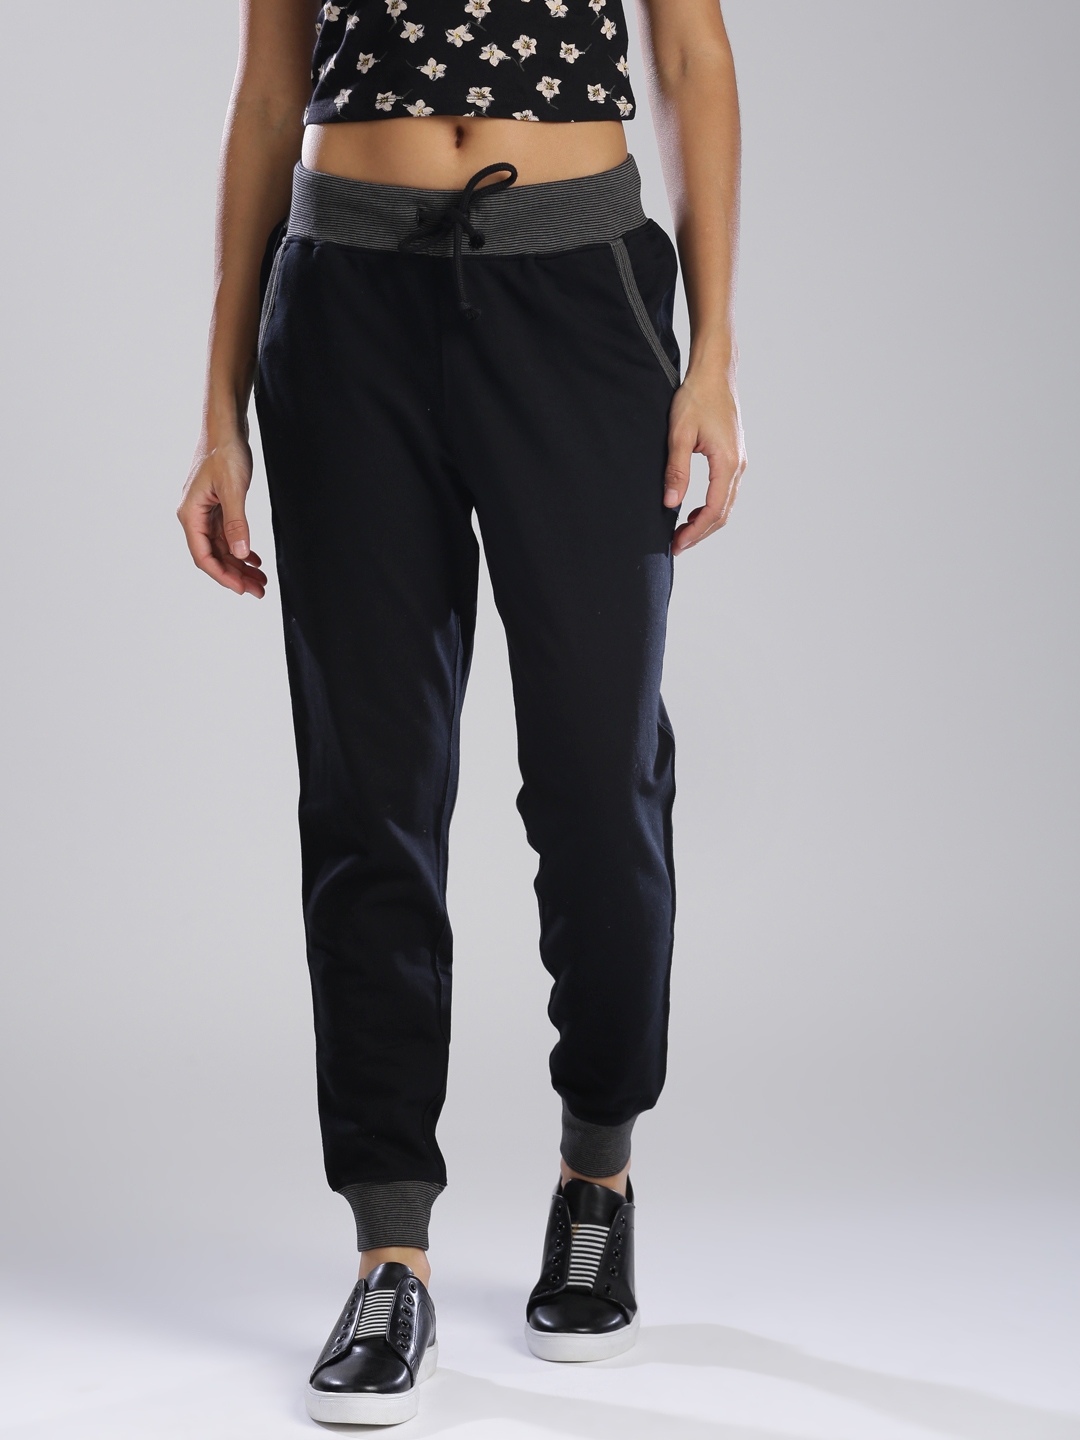 Buy Levis Black Joggers - Track Pants for Women 2273722 | Myntra